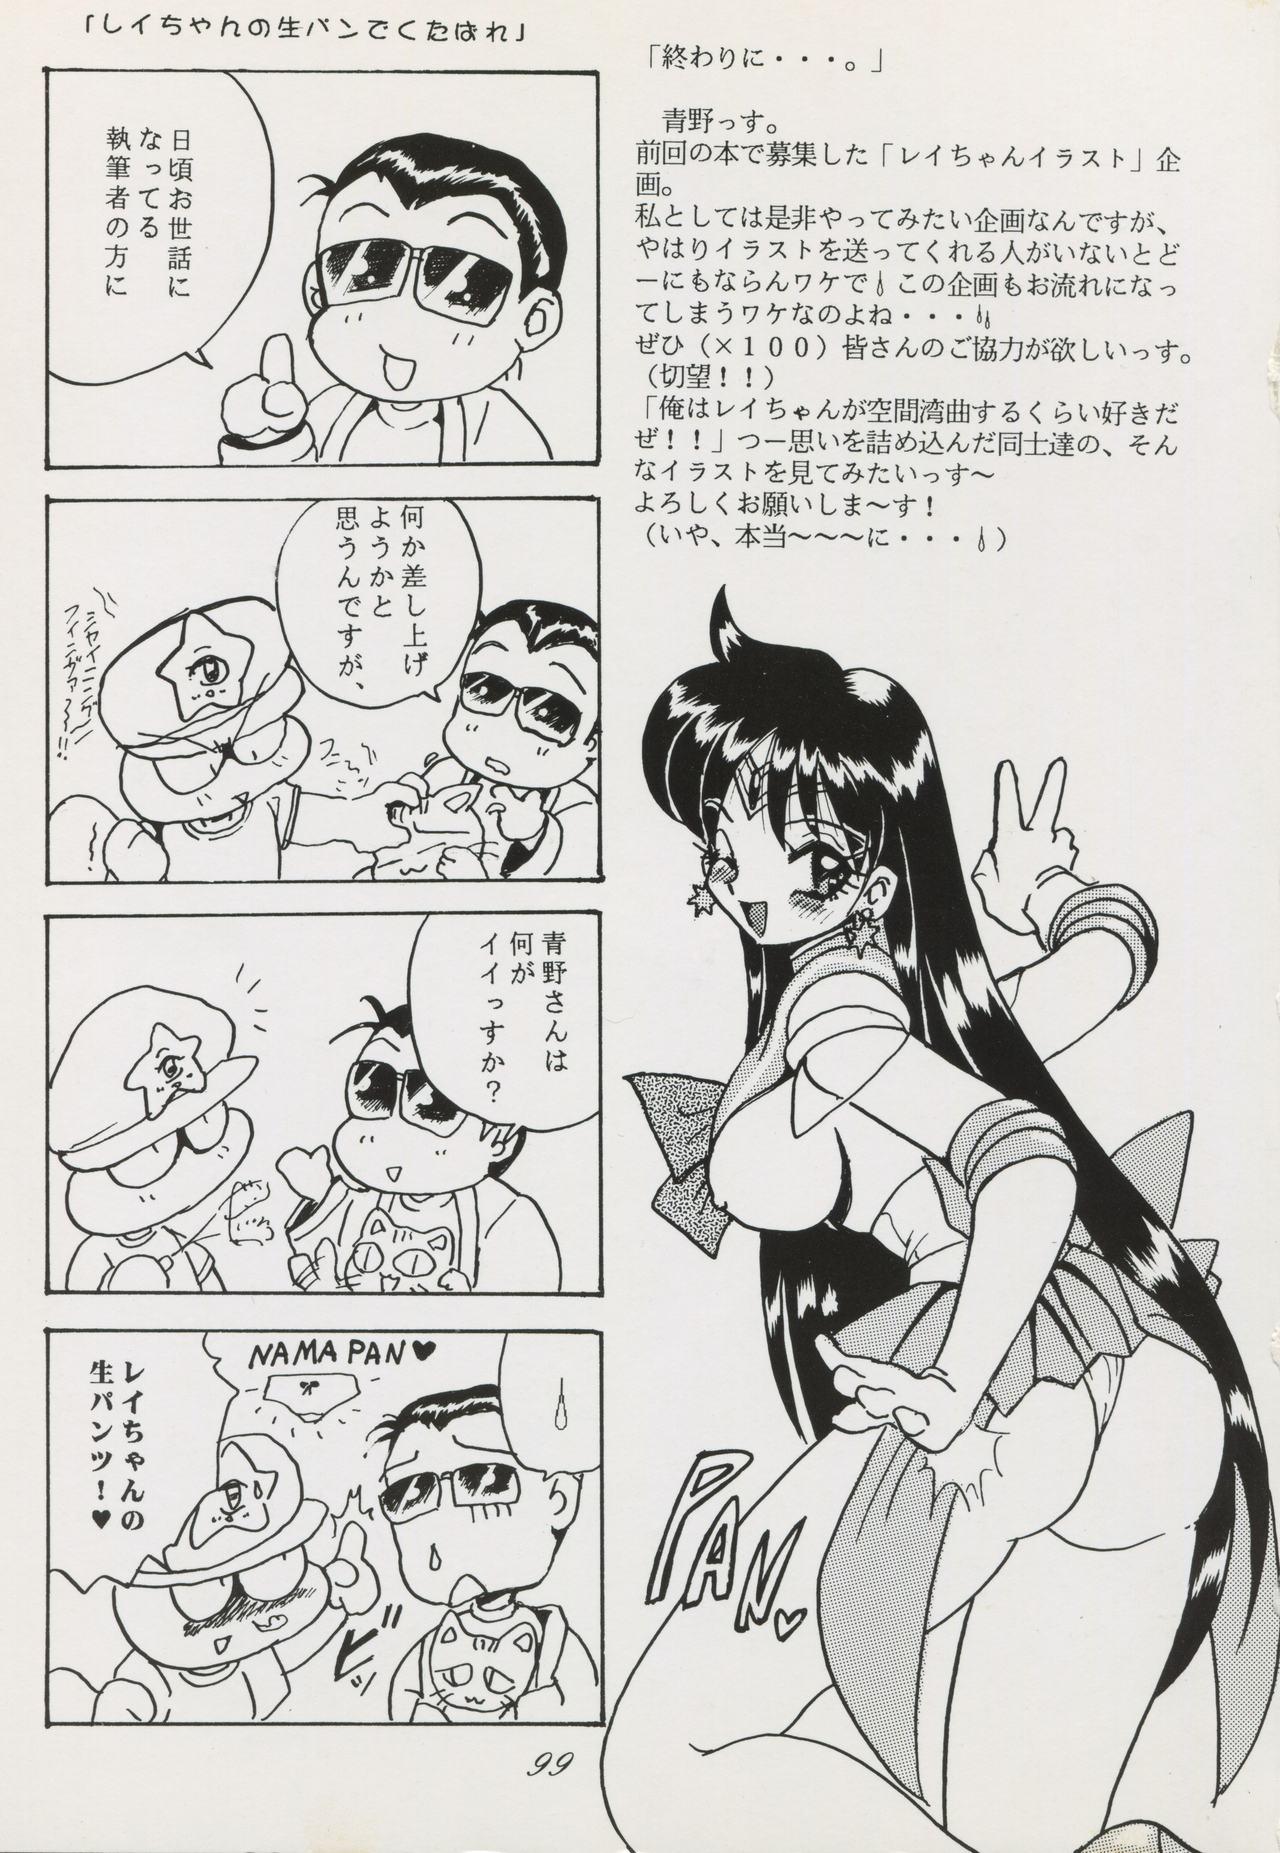 Sailor Moon 1 Page Gekijou P2 - SAILOR MOON ONE PAGE THEATER II 98